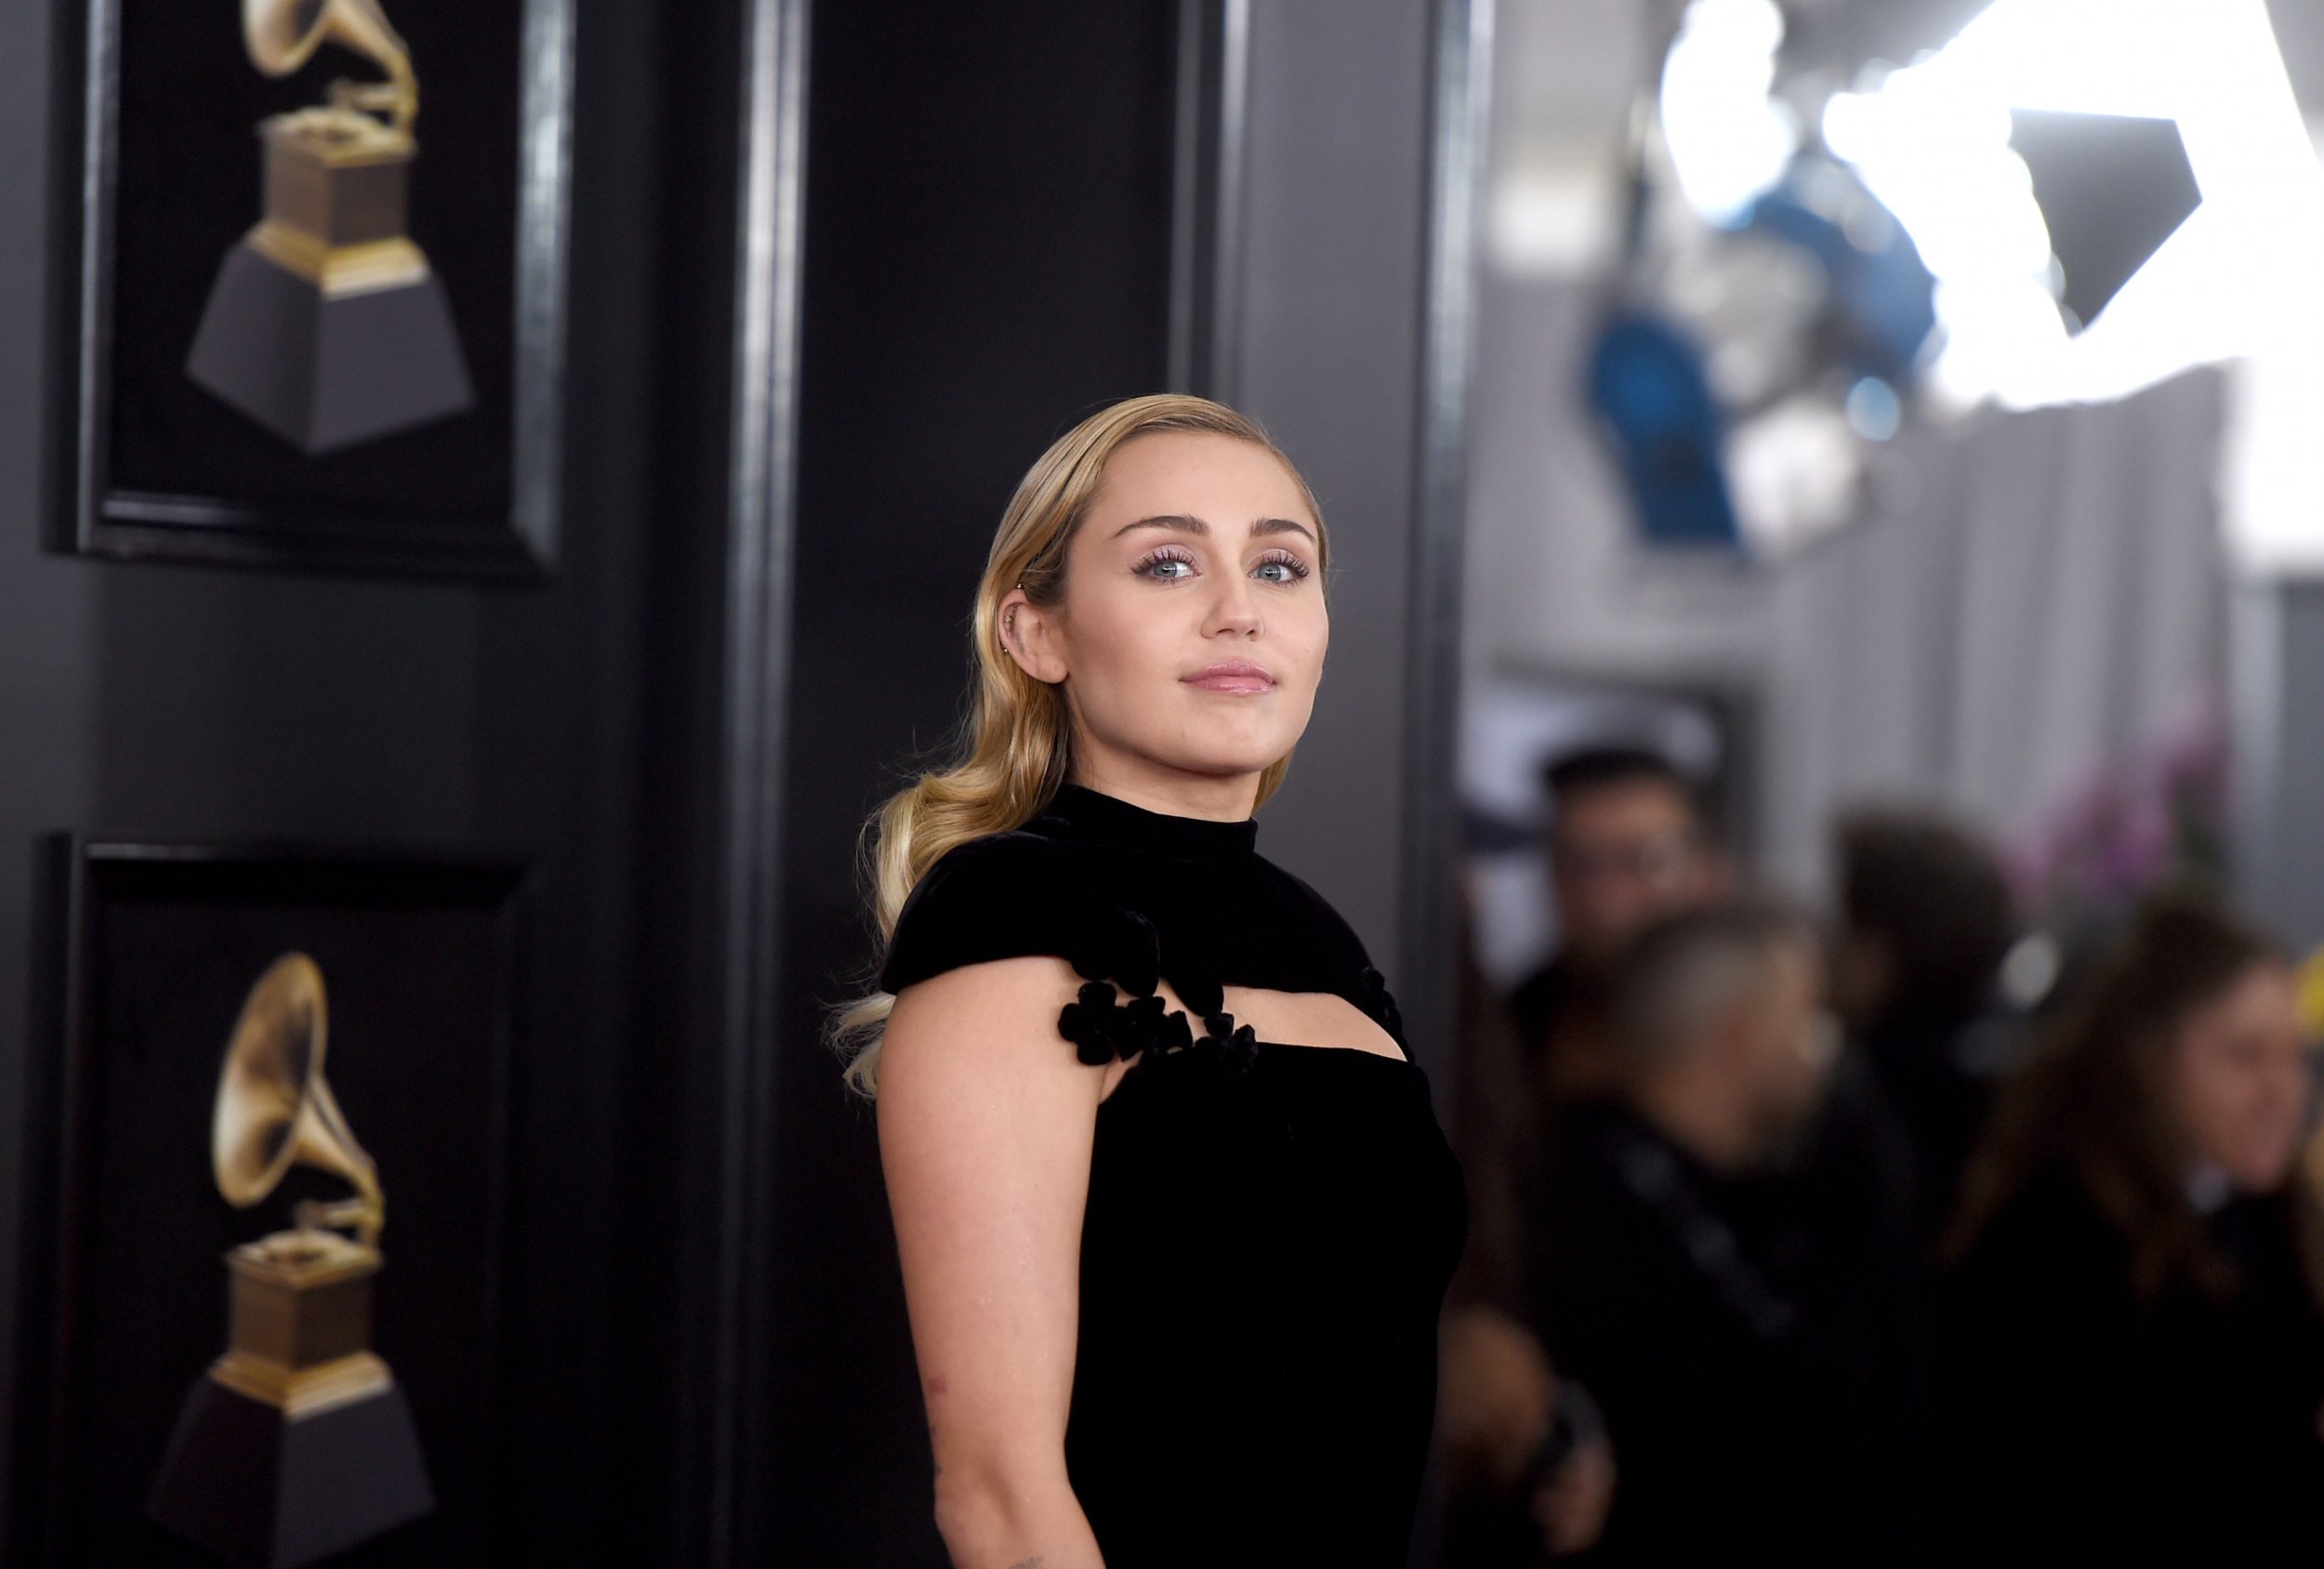 Miley Cyrus's Instagram Remains Clean Amid Pregnancy Speculation